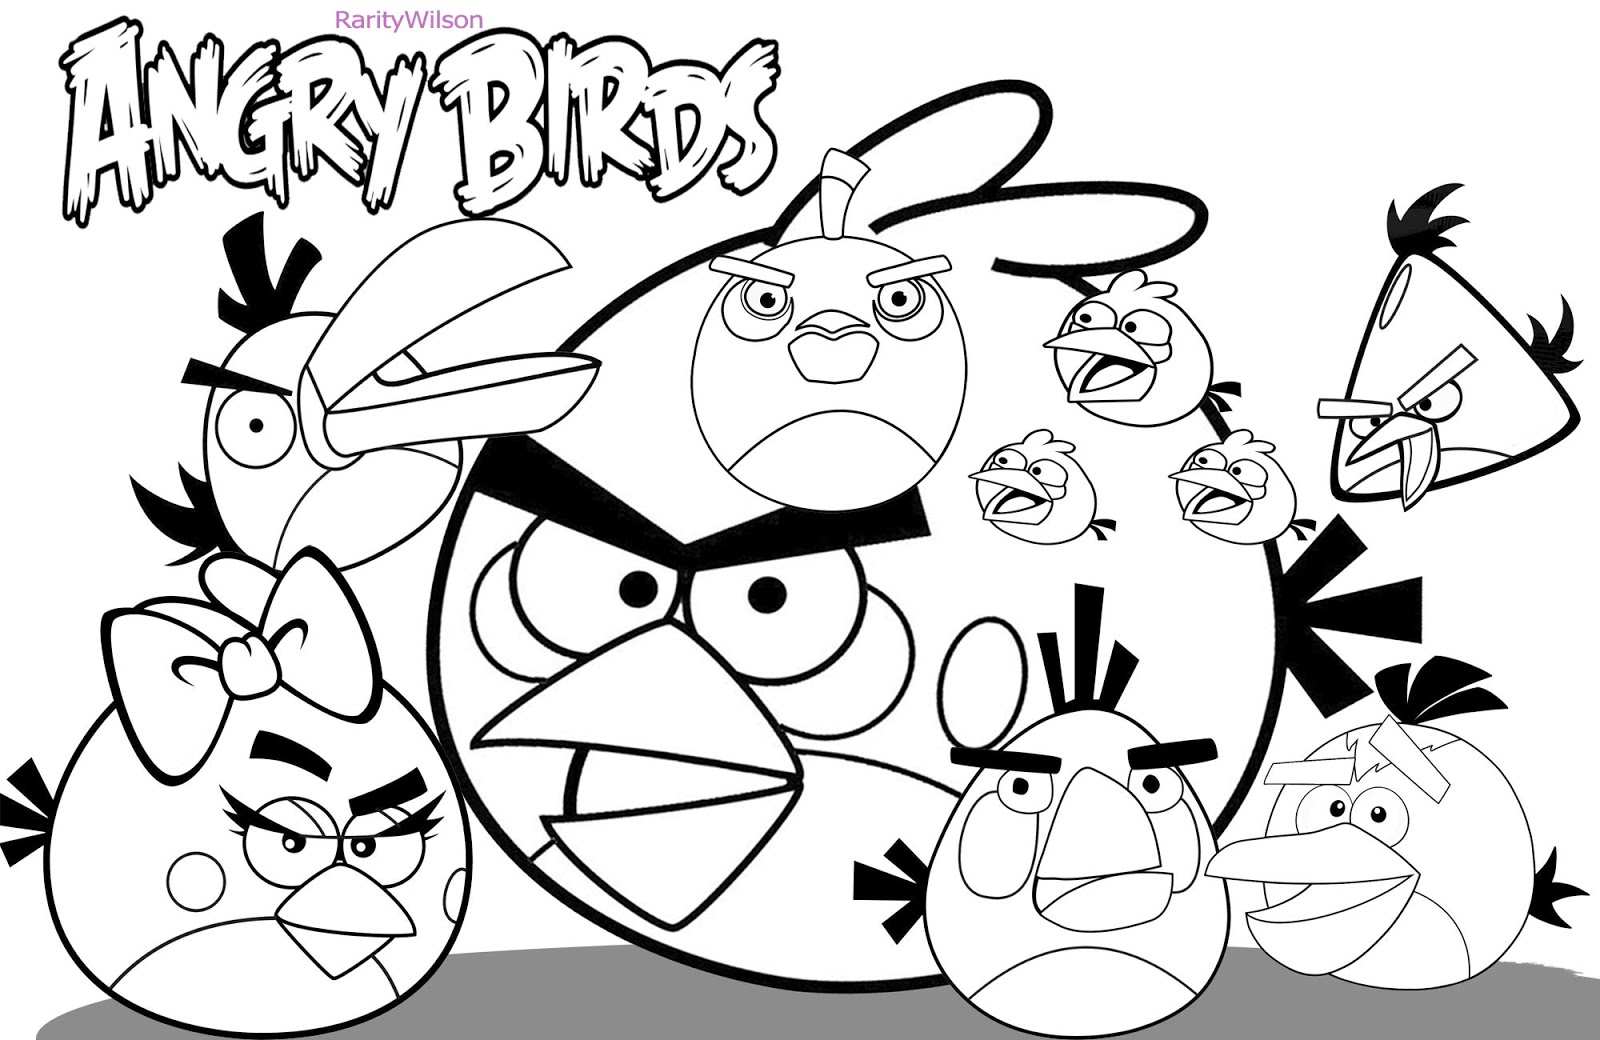 Original Black Bird Angry Birds Coloring Pages